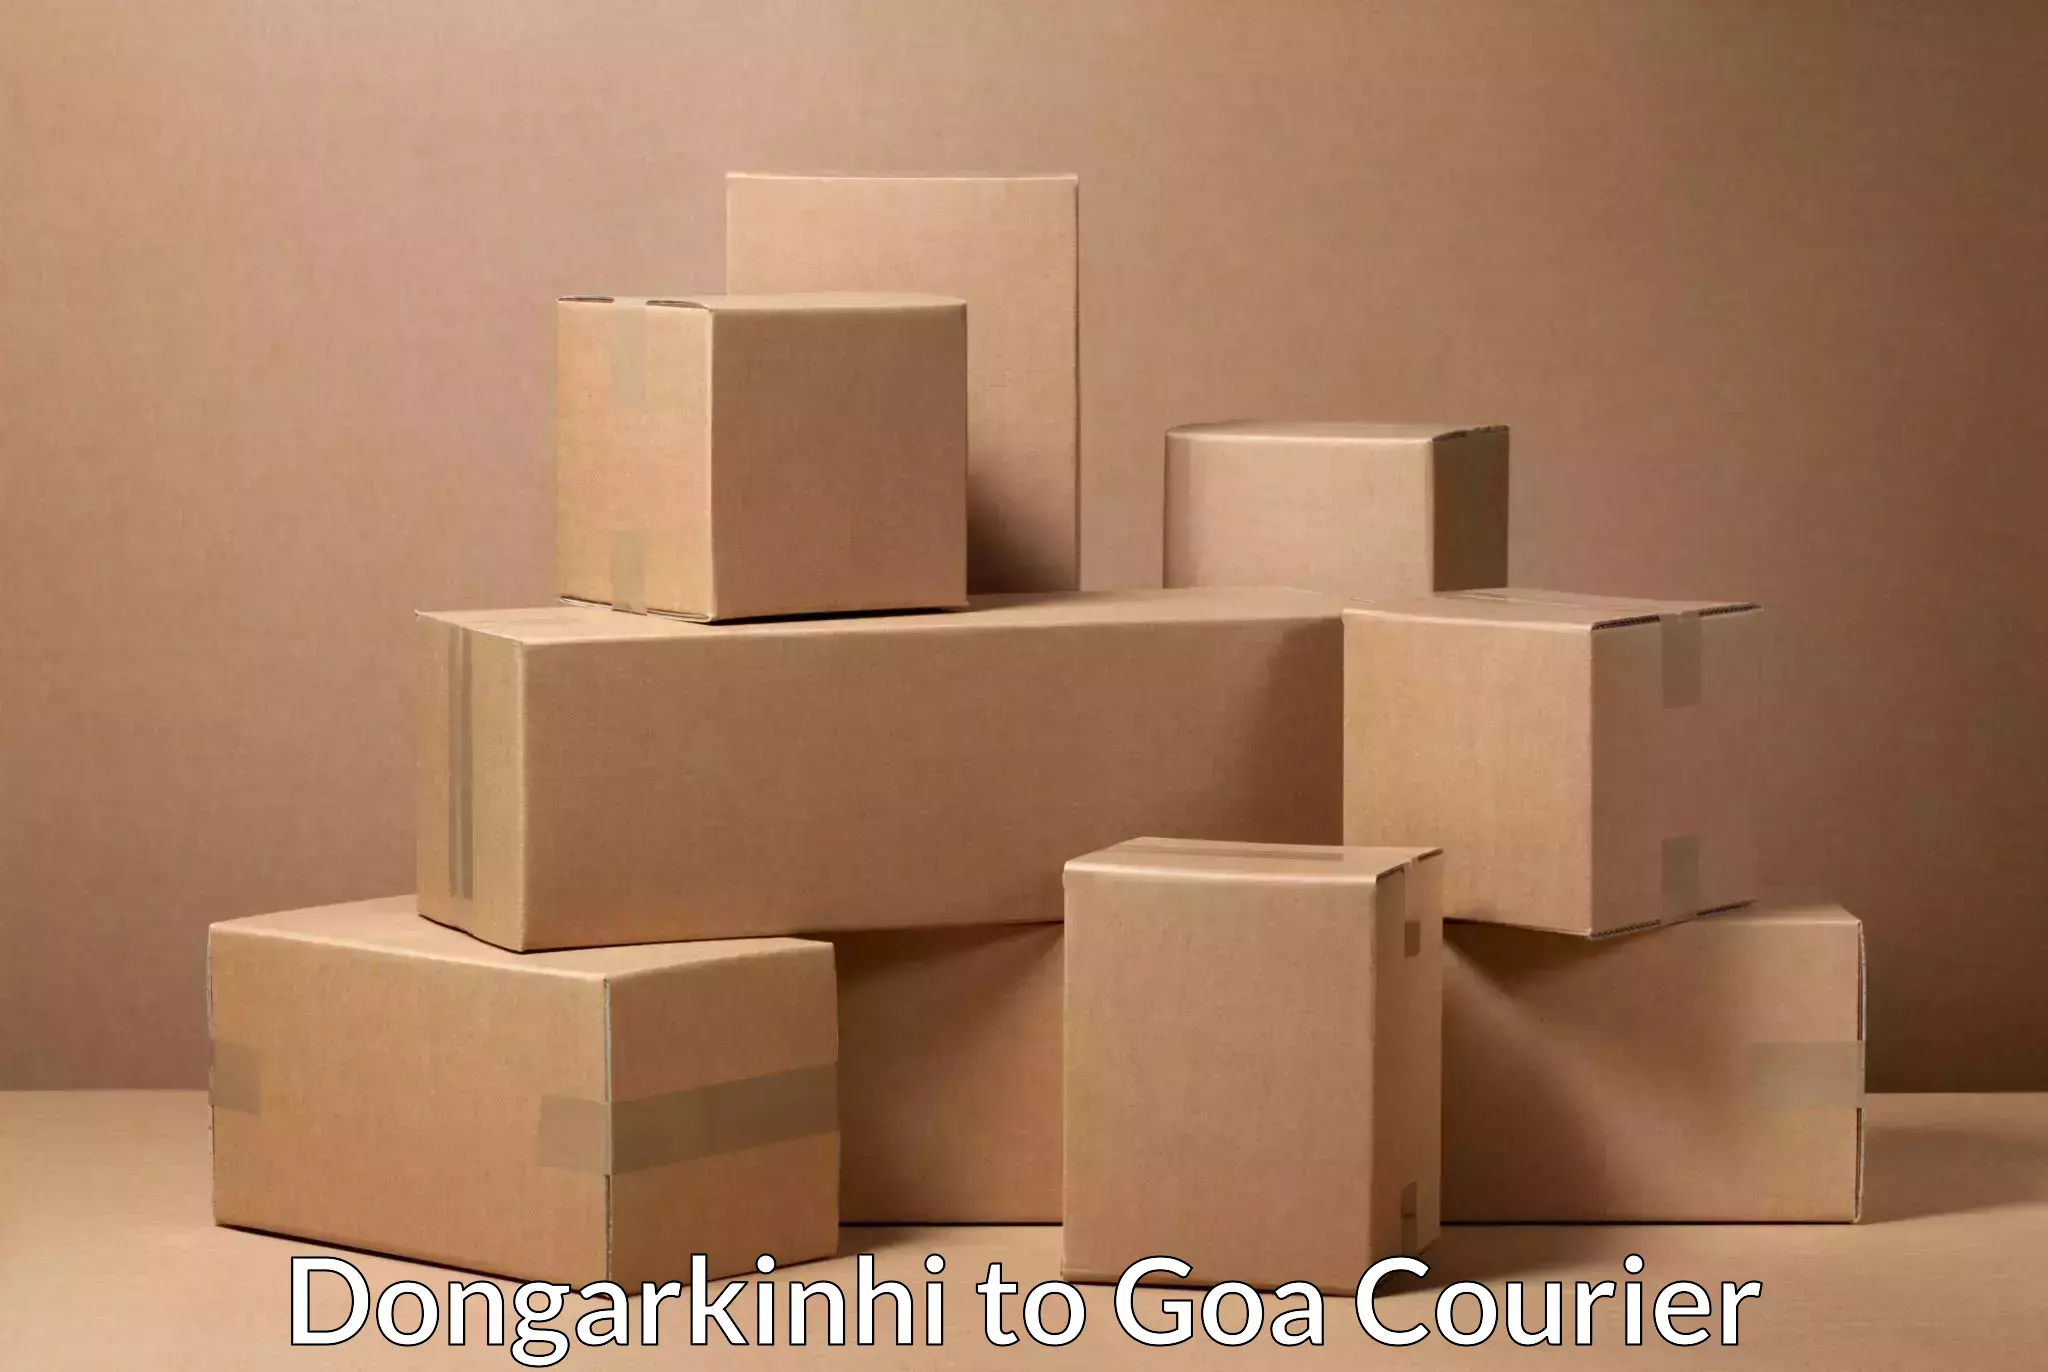 Personal courier services Dongarkinhi to Bicholim